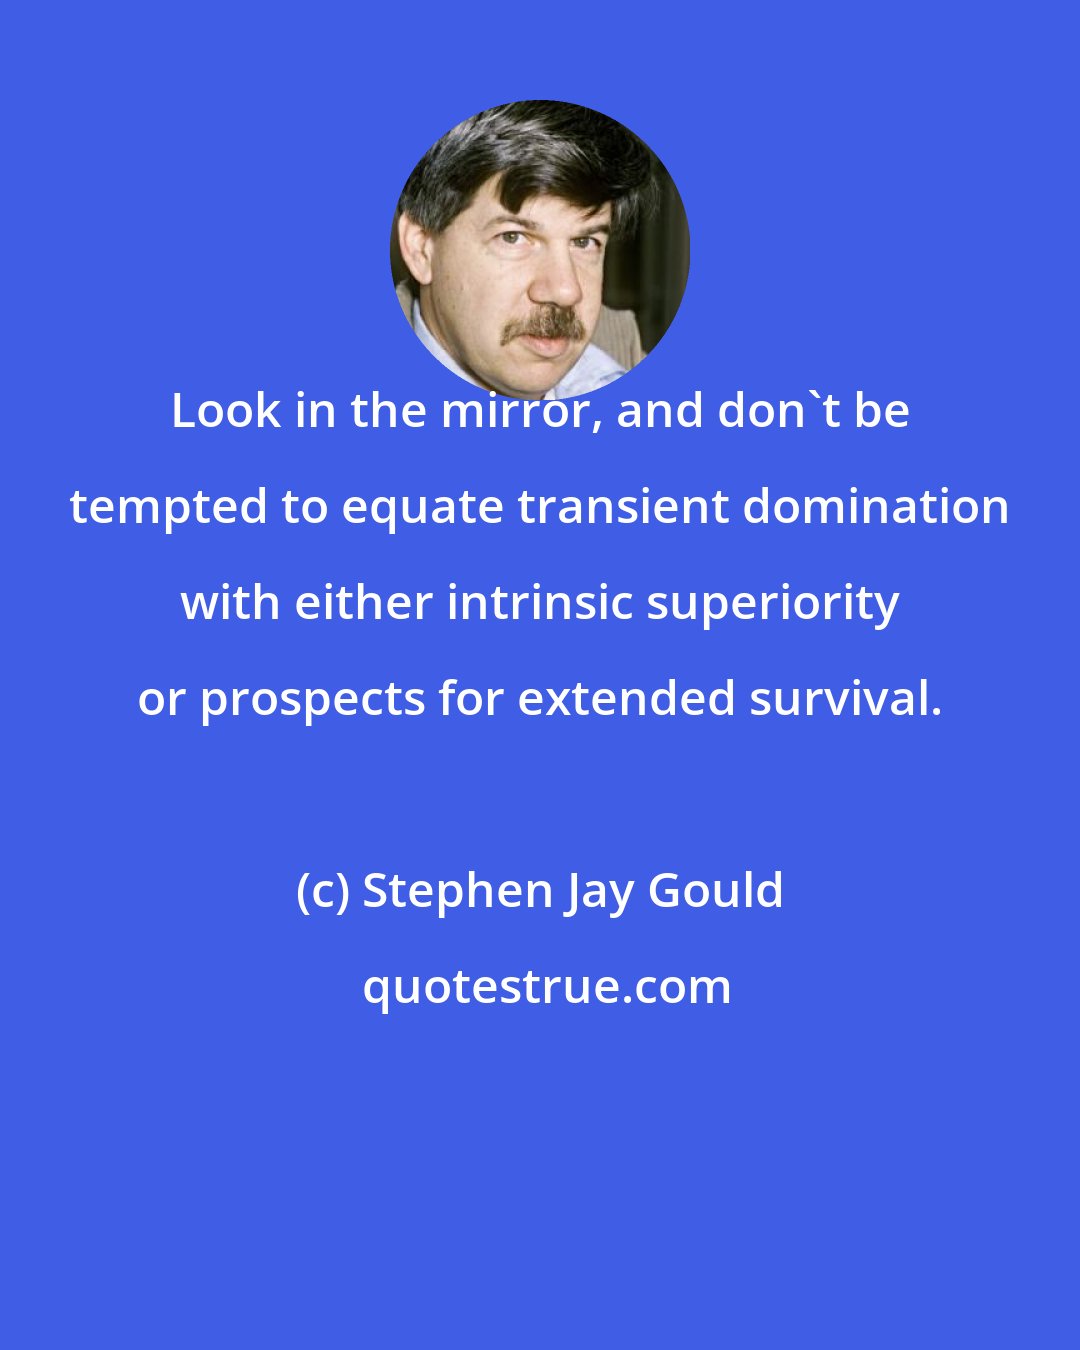 Stephen Jay Gould: Look in the mirror, and don't be tempted to equate transient domination with either intrinsic superiority or prospects for extended survival.